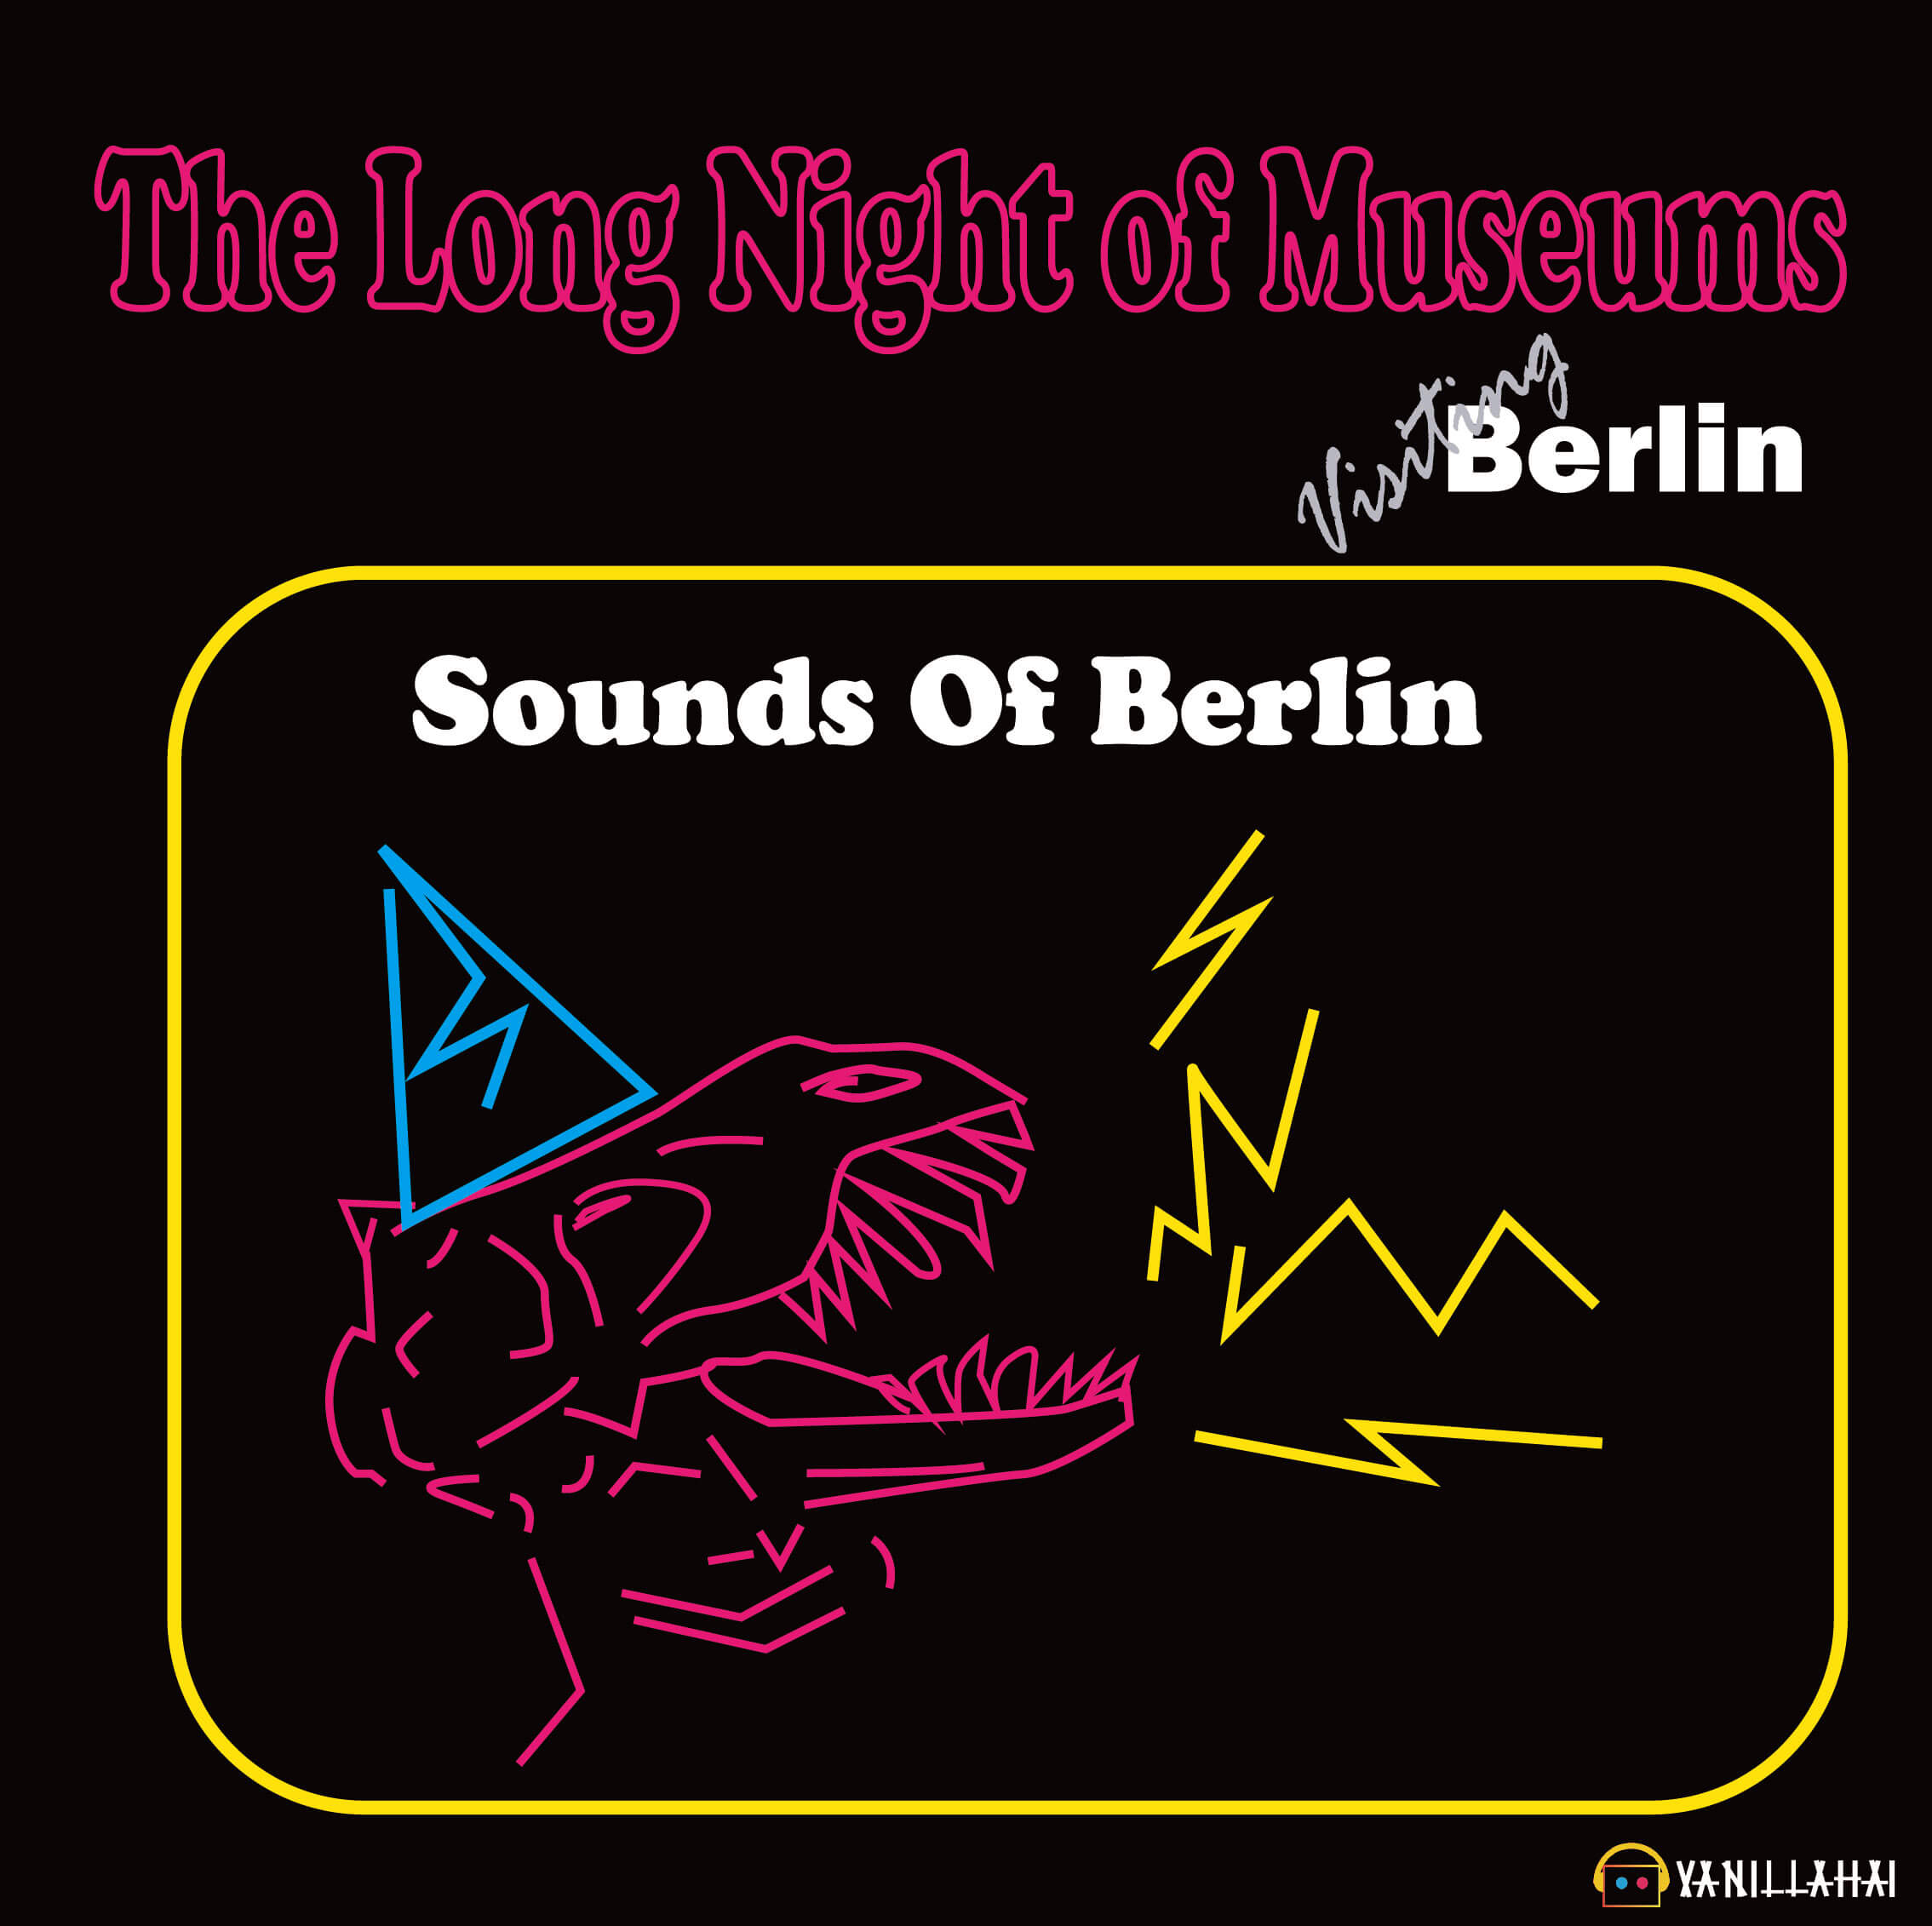 The Long Night of Museums Berlin